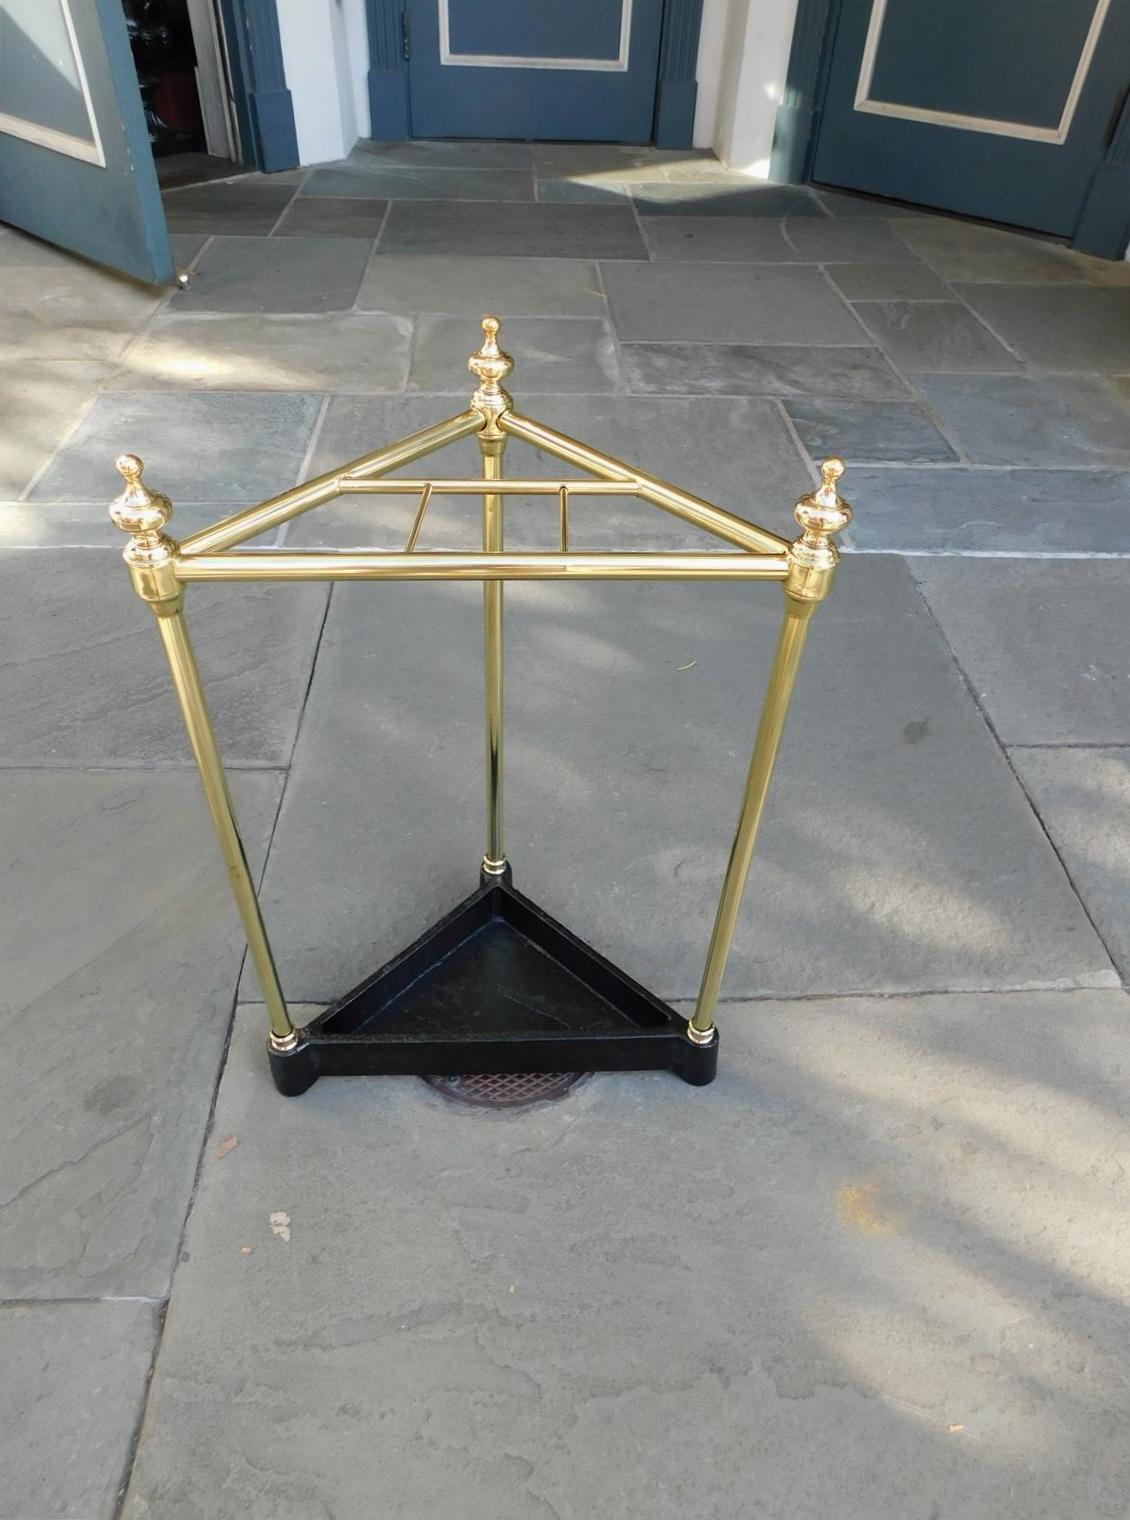 Late 19th Century American Triangular Brass & Iron Urn Finial Four Slotted Umbrella Stand, C. 1880 For Sale